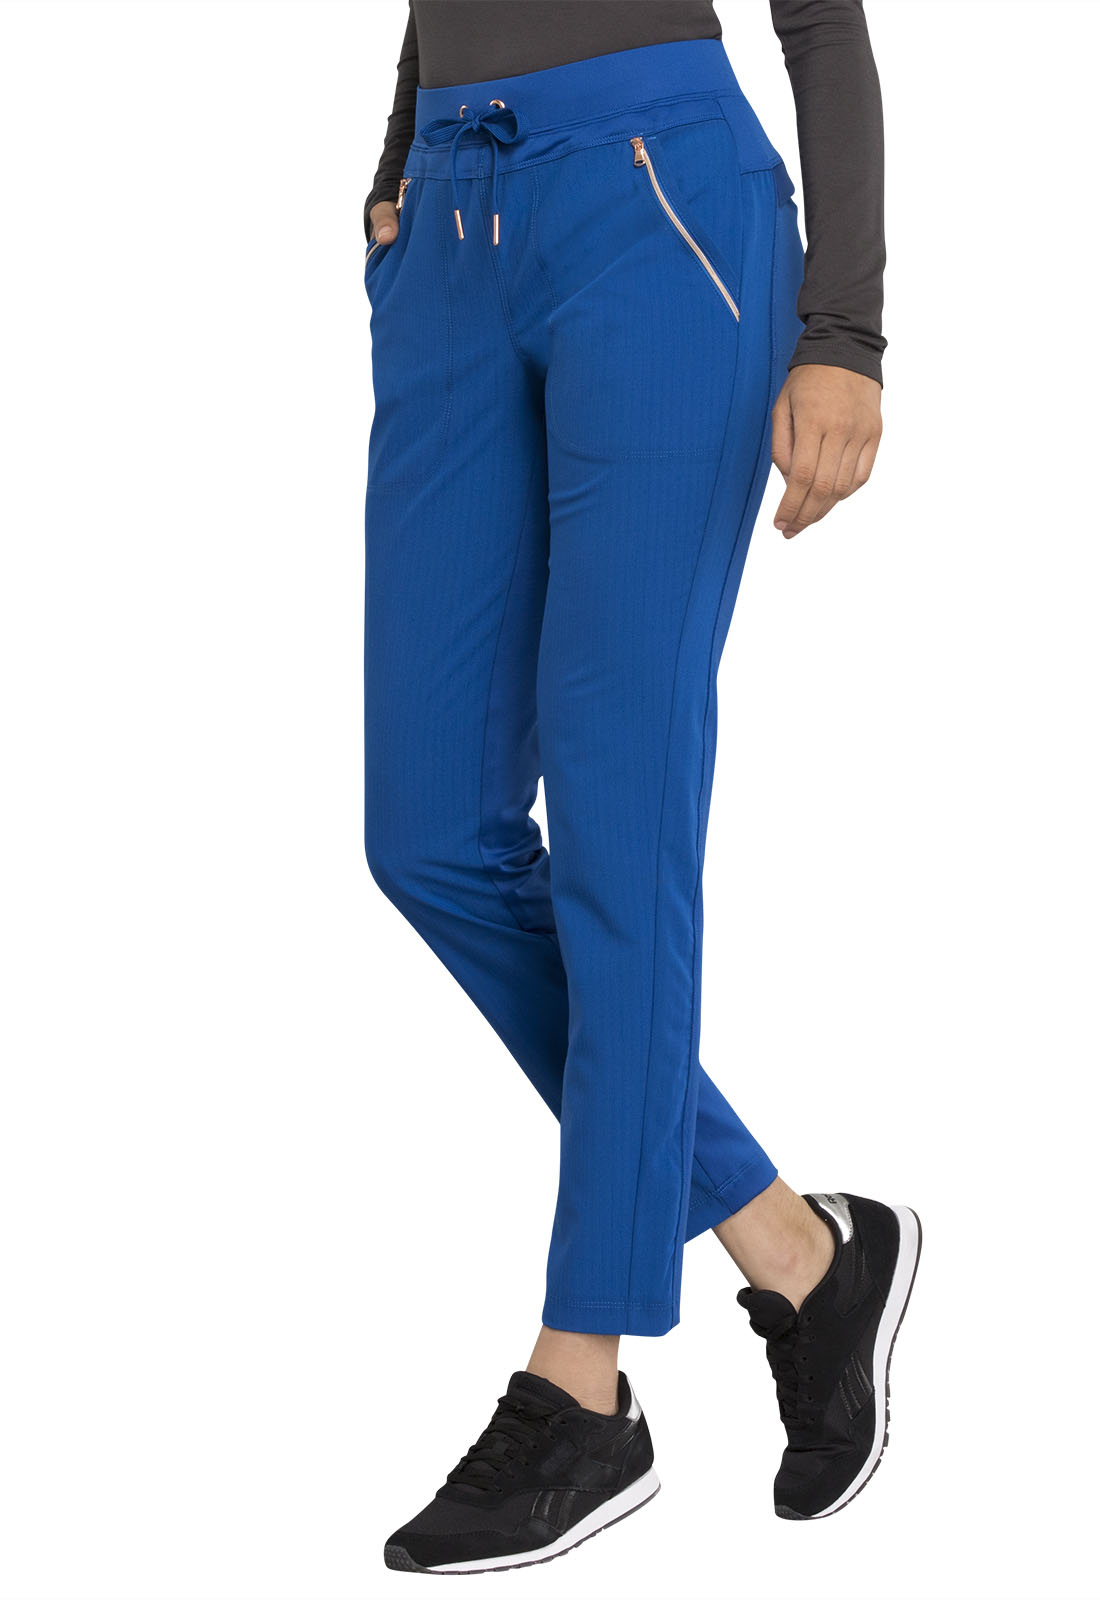 Cherokee Statement Mid Rise Tapered Leg Drawstring Pant - CK055 -  𝗖𝗟𝗘𝗔𝗥𝗔𝗡𝗖𝗘! - Best Value Medical